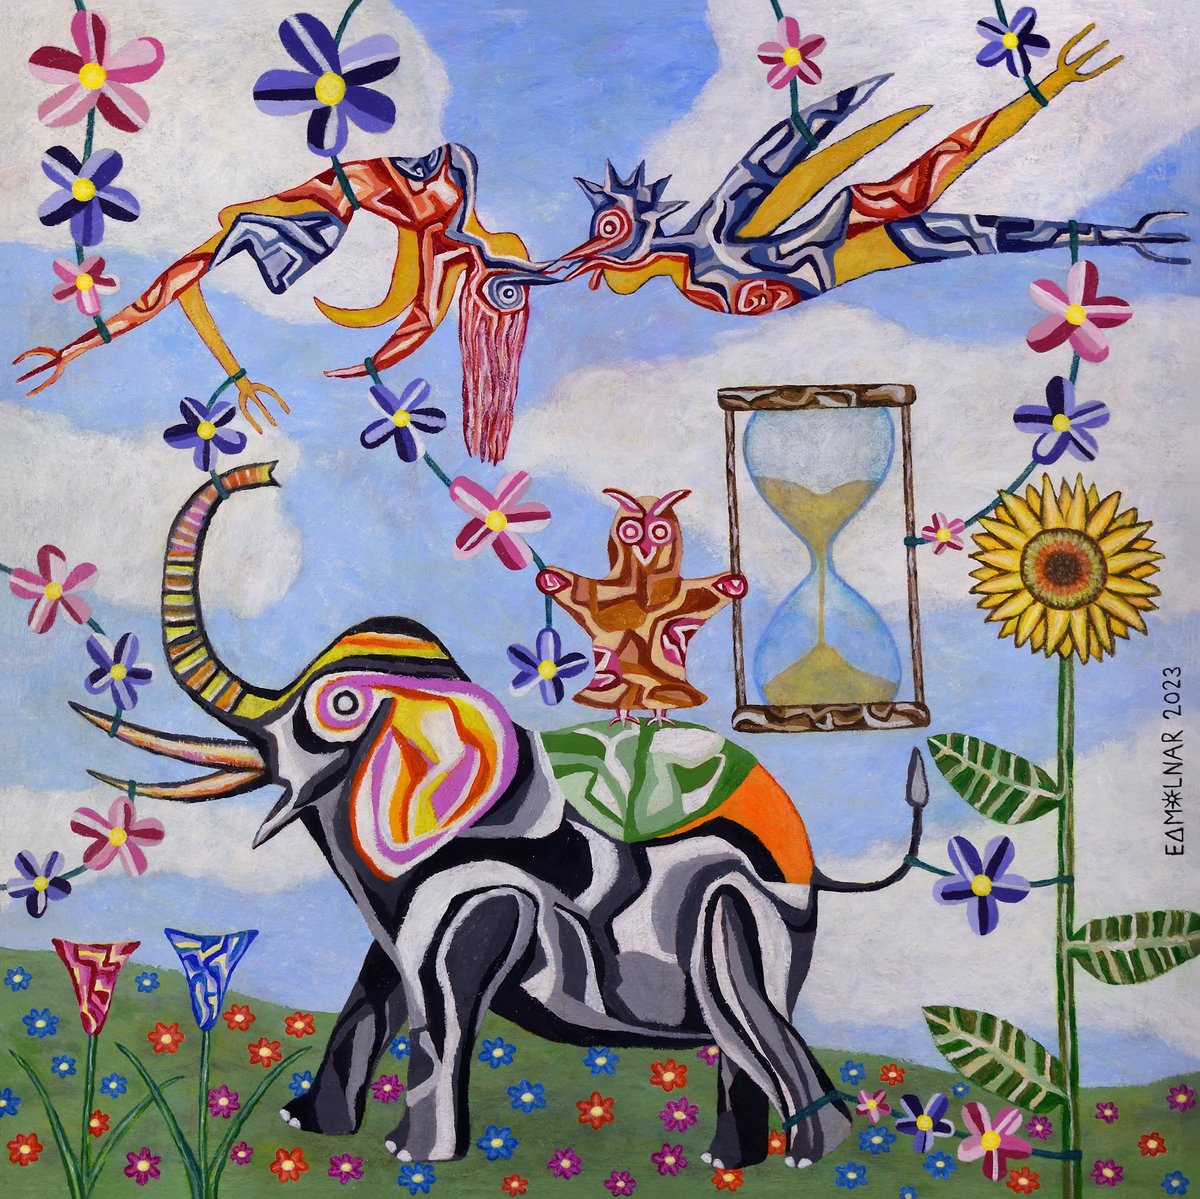 Love in the air, Acrylic on canvas, 100x100cm(40x40in)
The description of what this painting symbolizes is added in alt text.
Visit my website and 'The Connections' gallery on my website iamabird.art for more info
#symbolism #cubism #birds #painting #love  #psychedelic